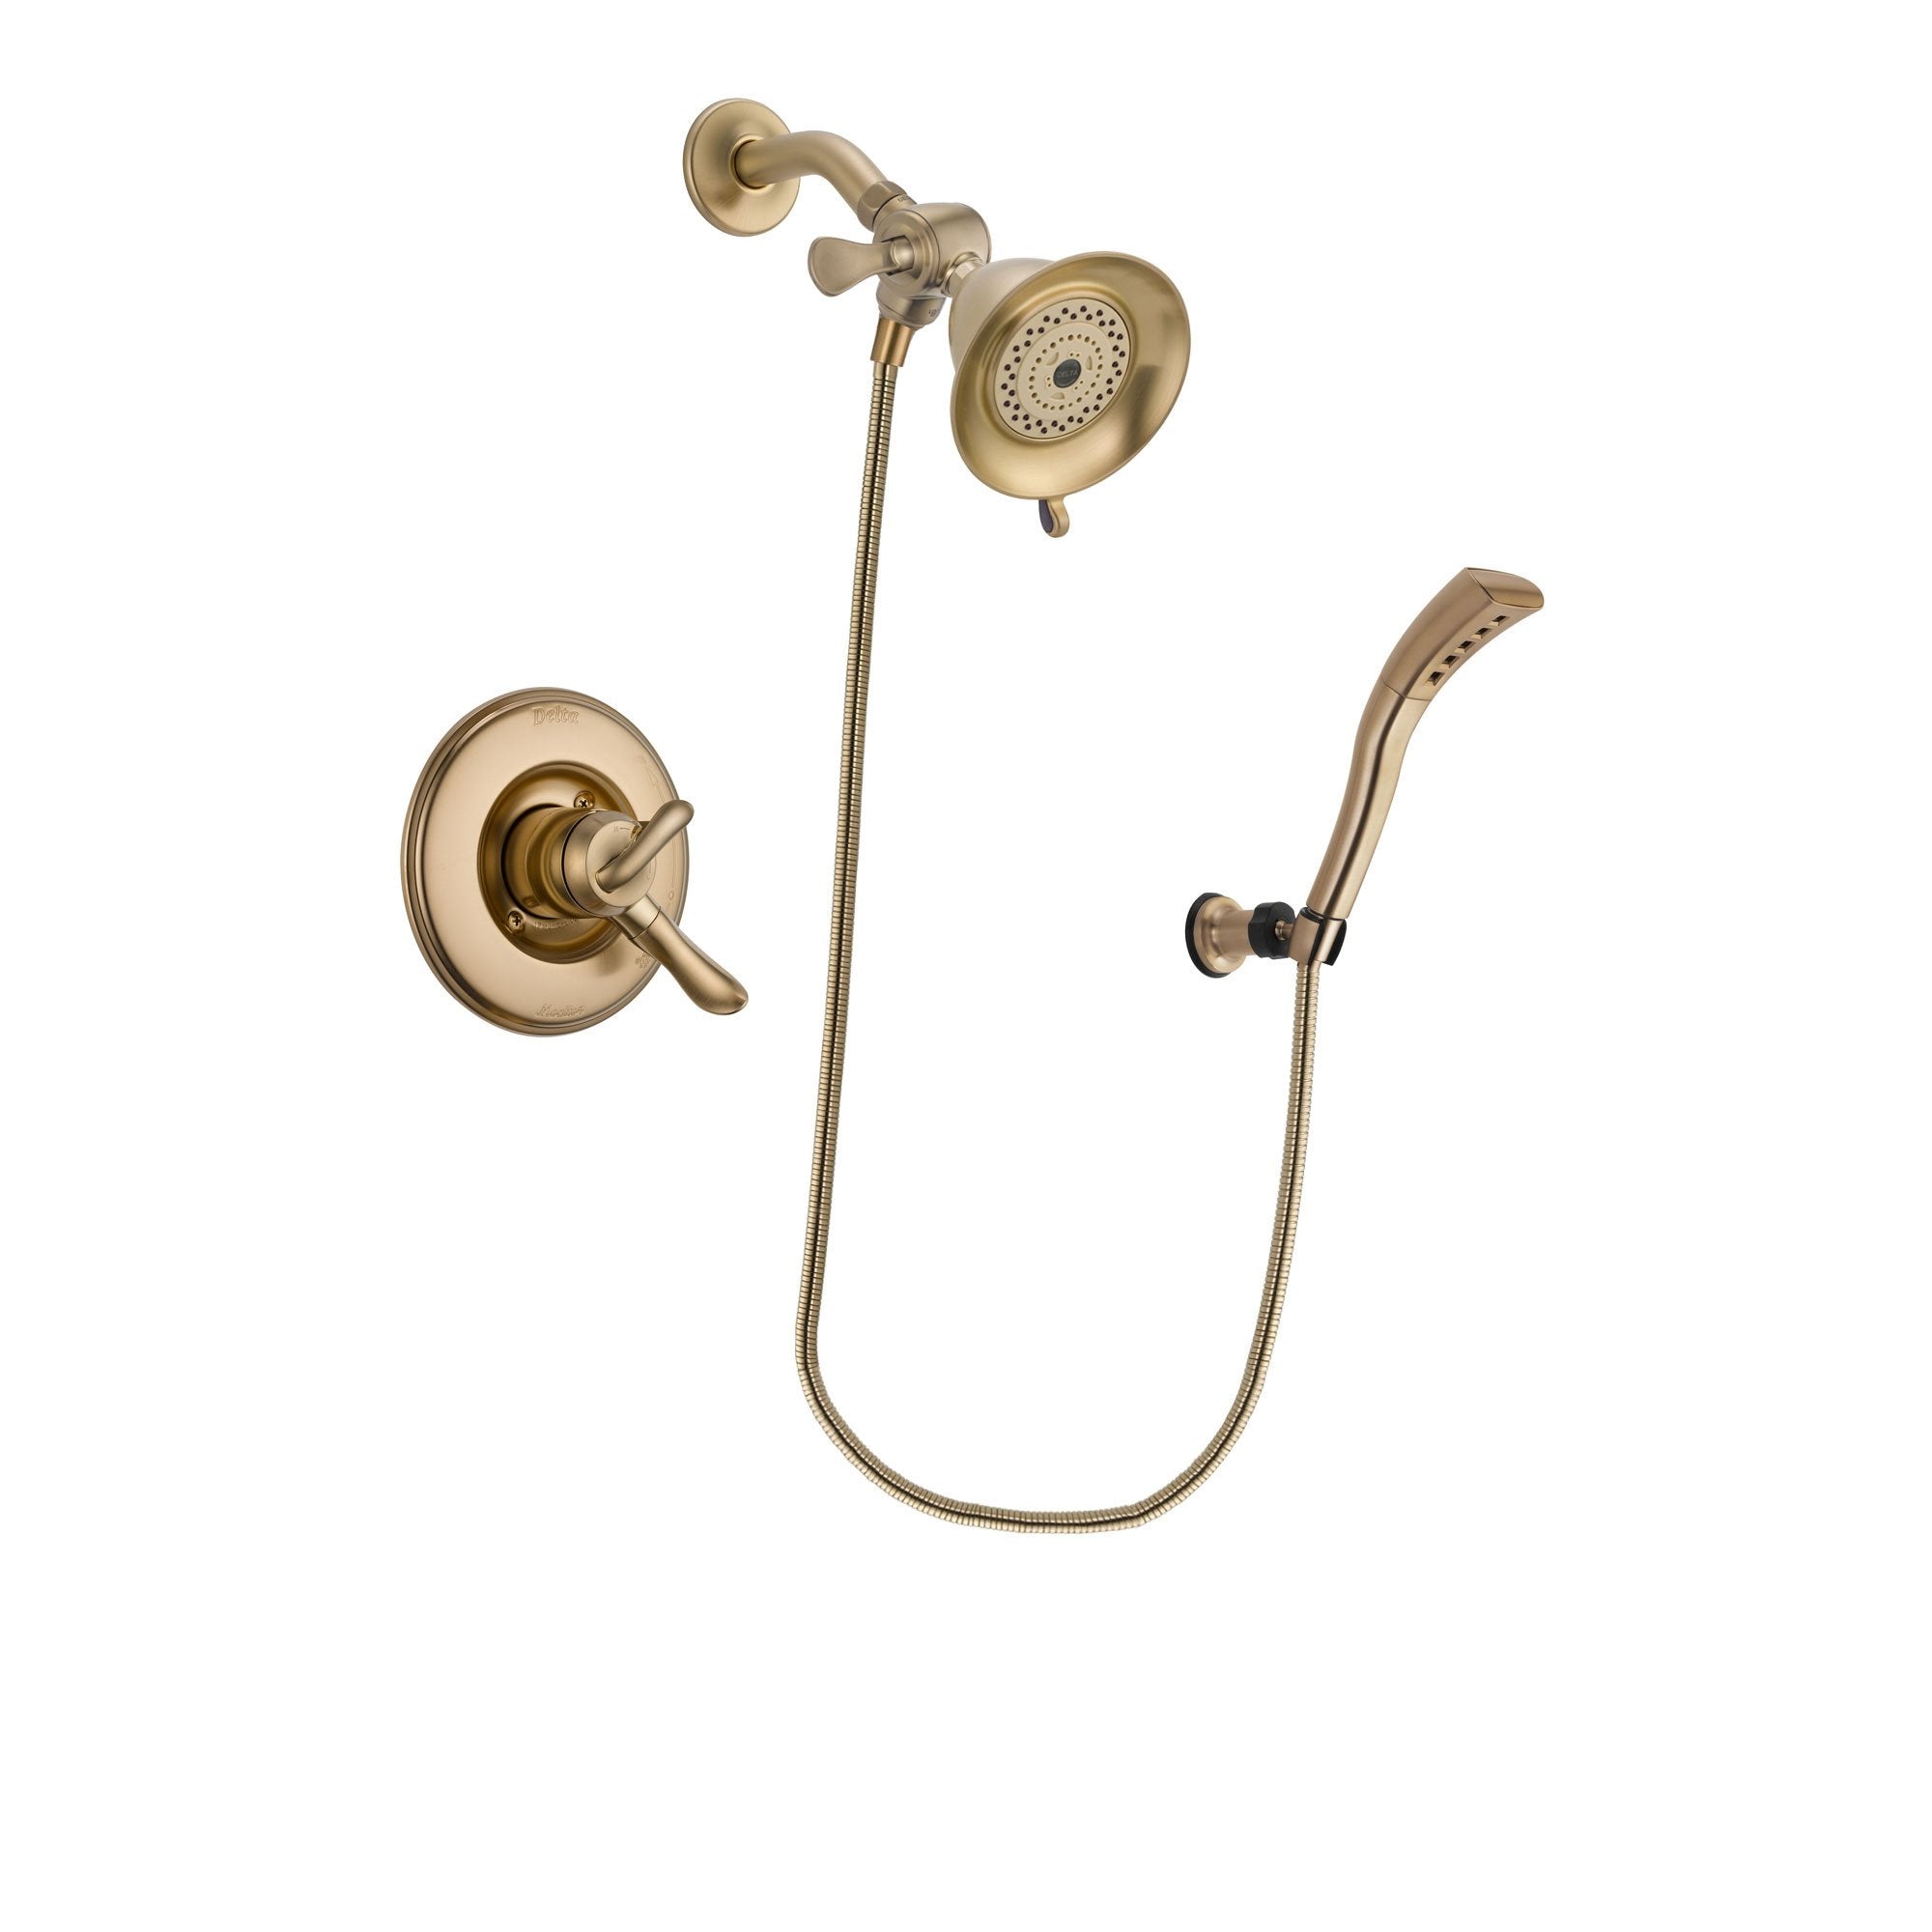 Delta Linden Champagne Bronze Finish Dual Control Shower Faucet System Package with Water-Efficient Shower Head and Modern Wall Mount Personal Handheld Shower Spray Includes Rough-in Valve DSP3652V